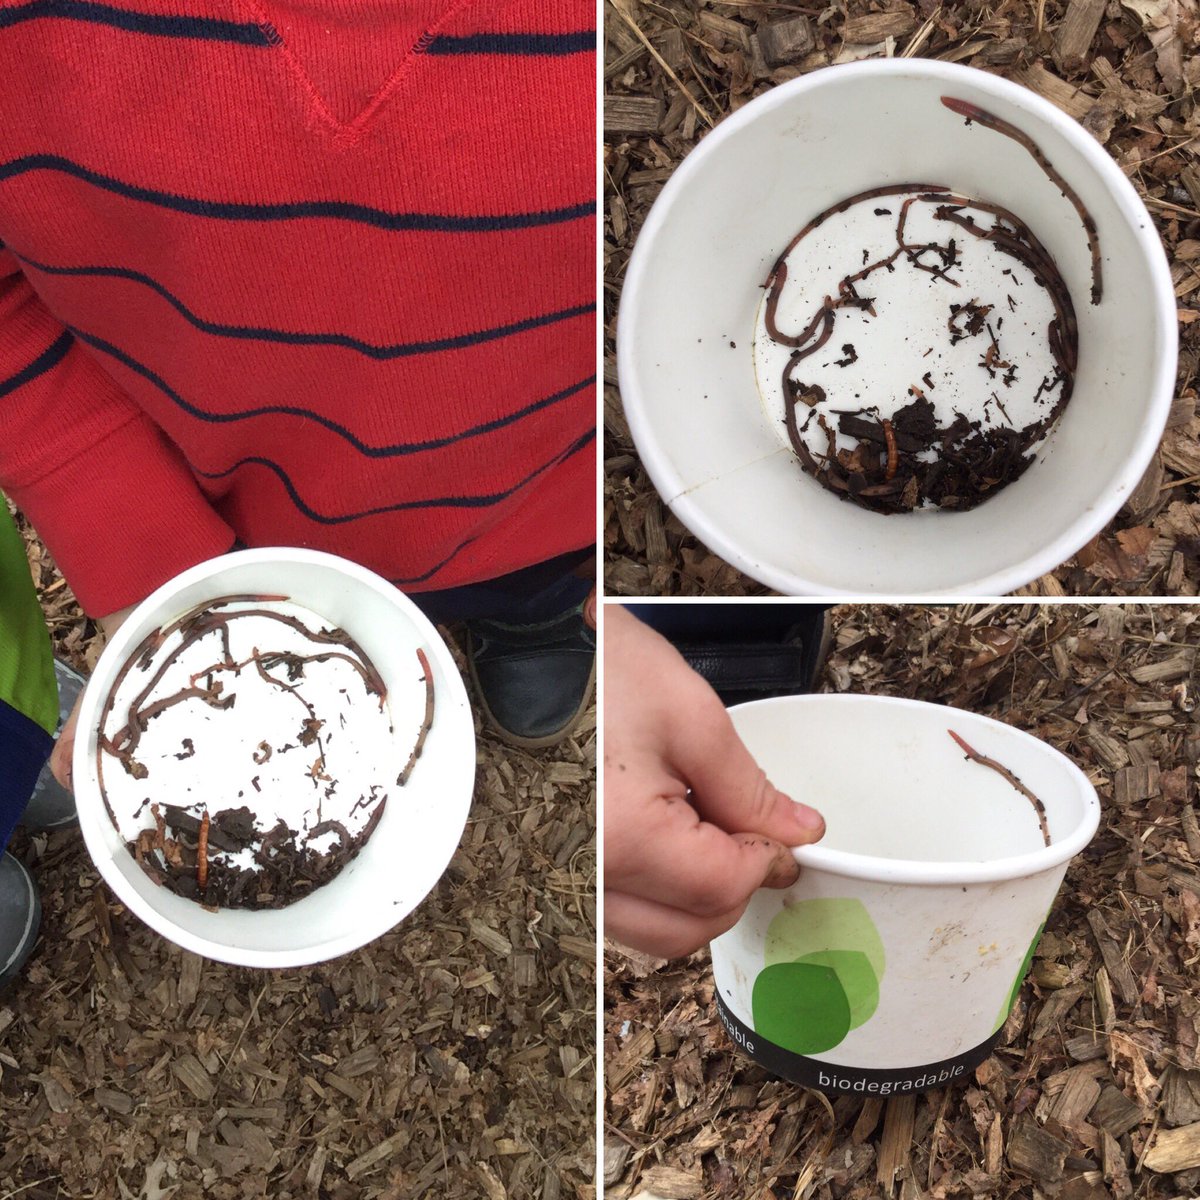 Grateful to @YRDSB for the efforts being taken to reduce waste during workshops. @pcpsyr we are doing the 2nd R and reusing! Soup bowls have made for great investigation tools as we continue our inquiry into worms! @YRDSBGetOut @InspireOutside